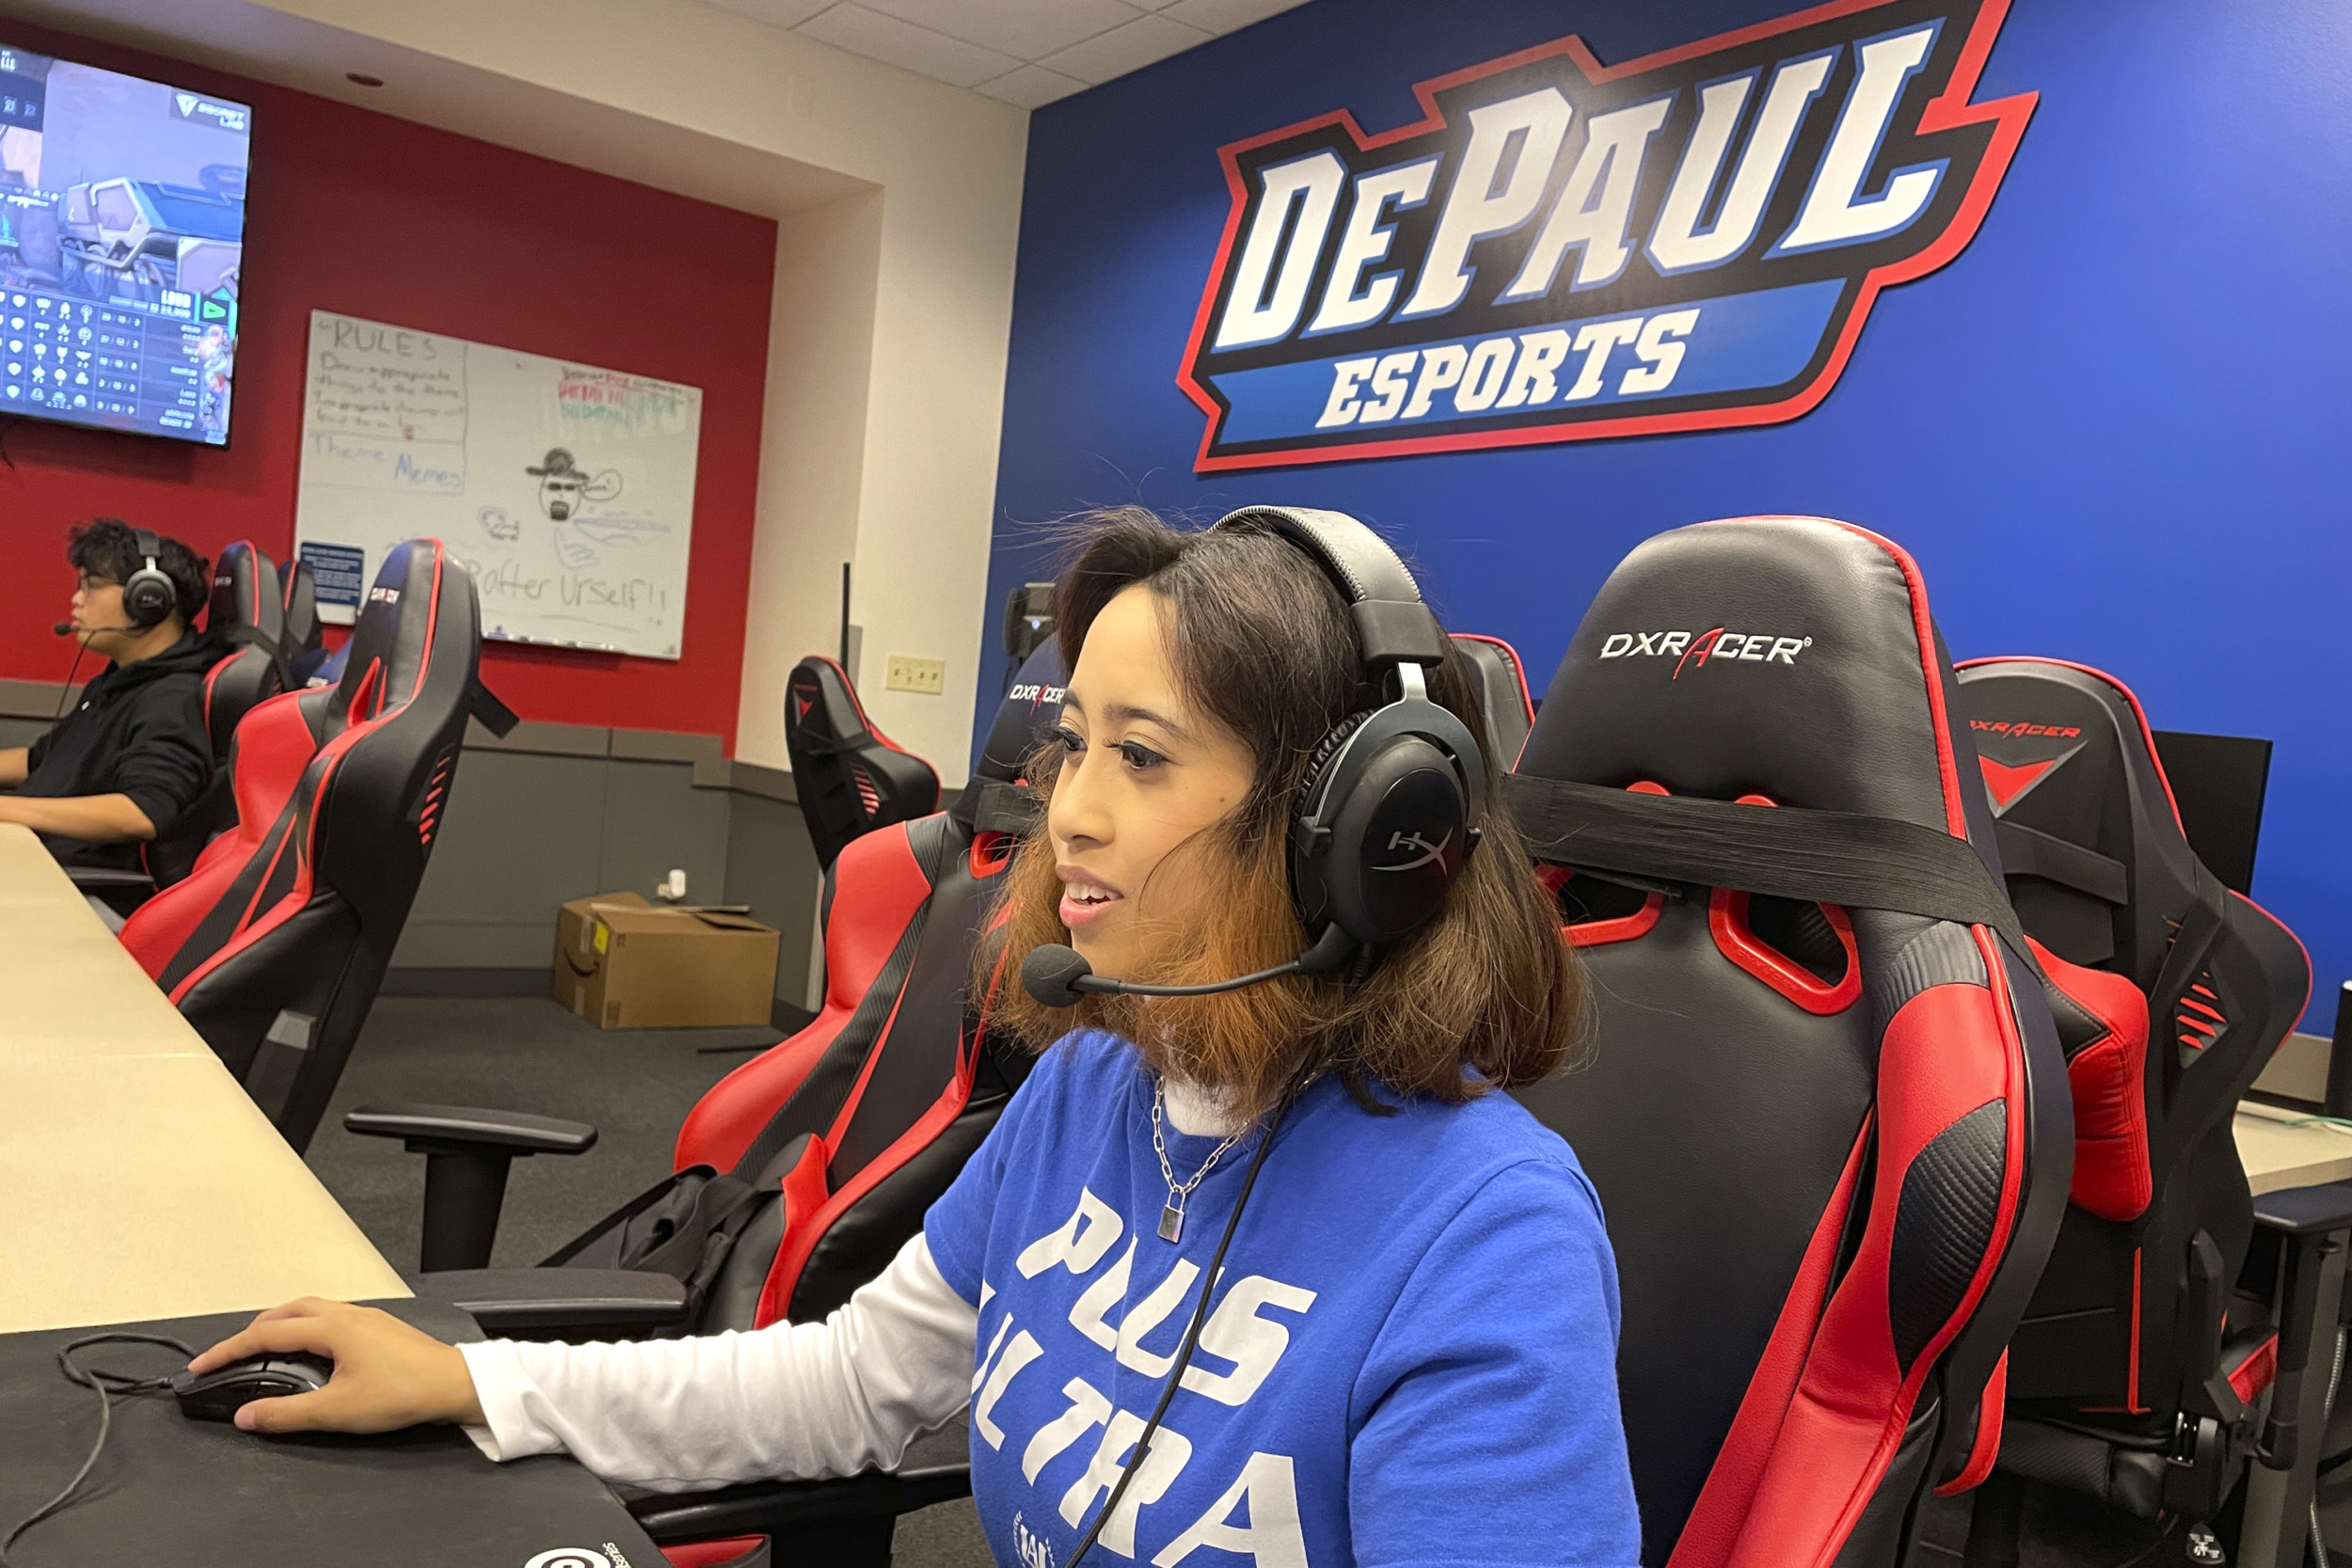 Esports: Young woman wearing headset sits at large computer screen in gaming room with multiple computers.